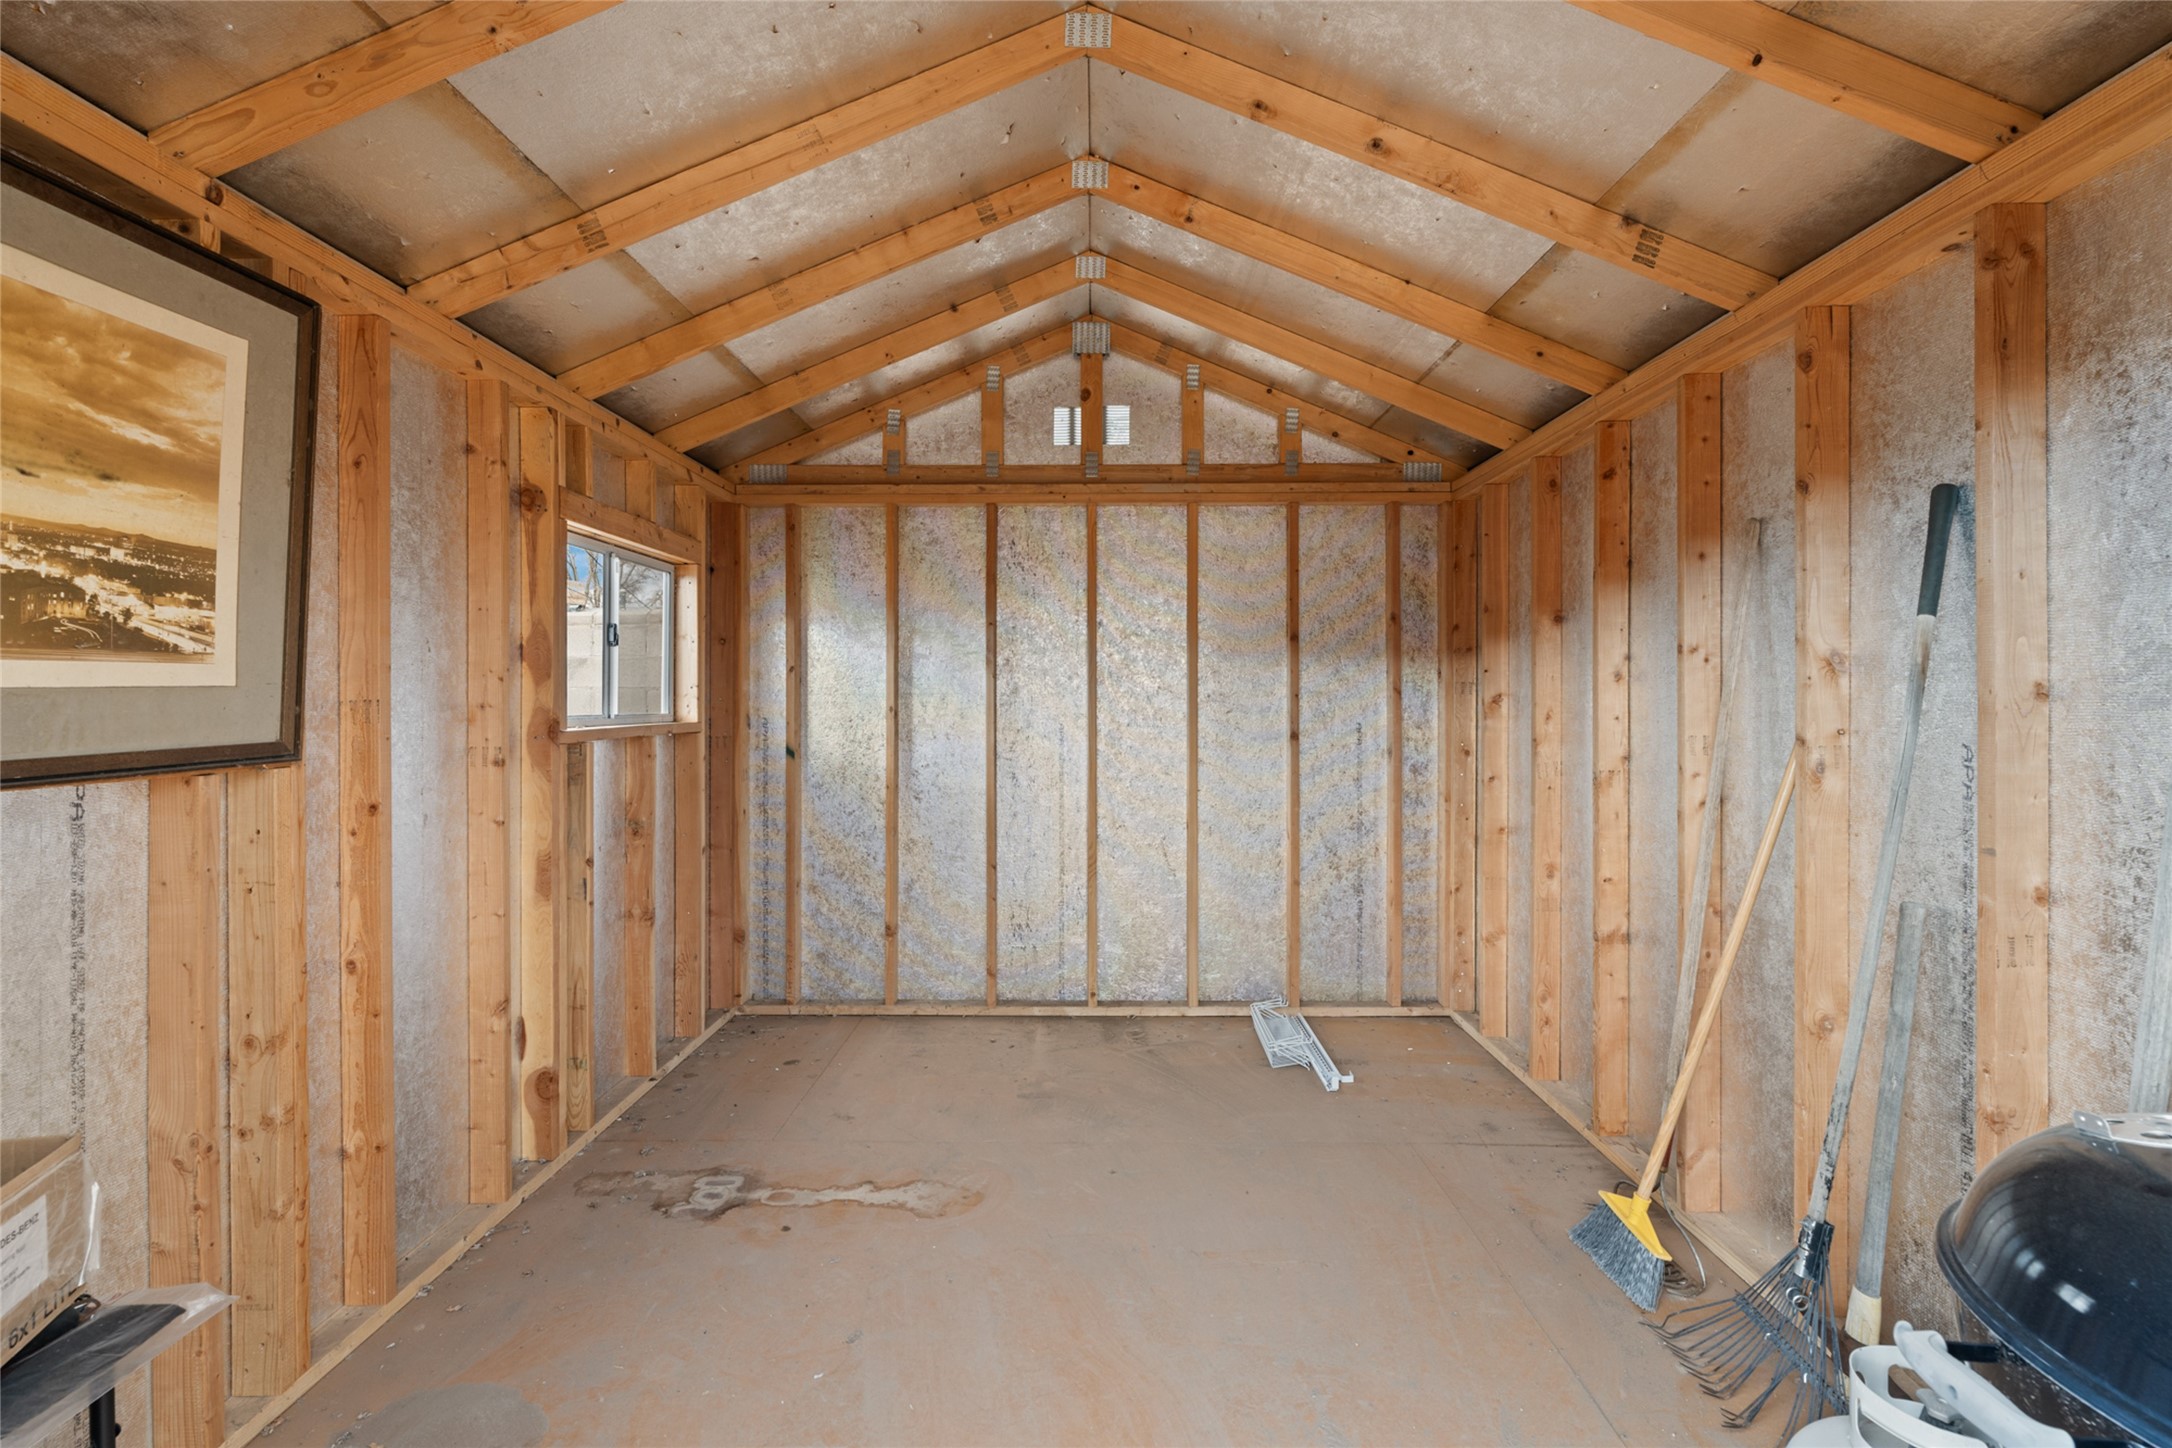 Inside of Tuff Shed